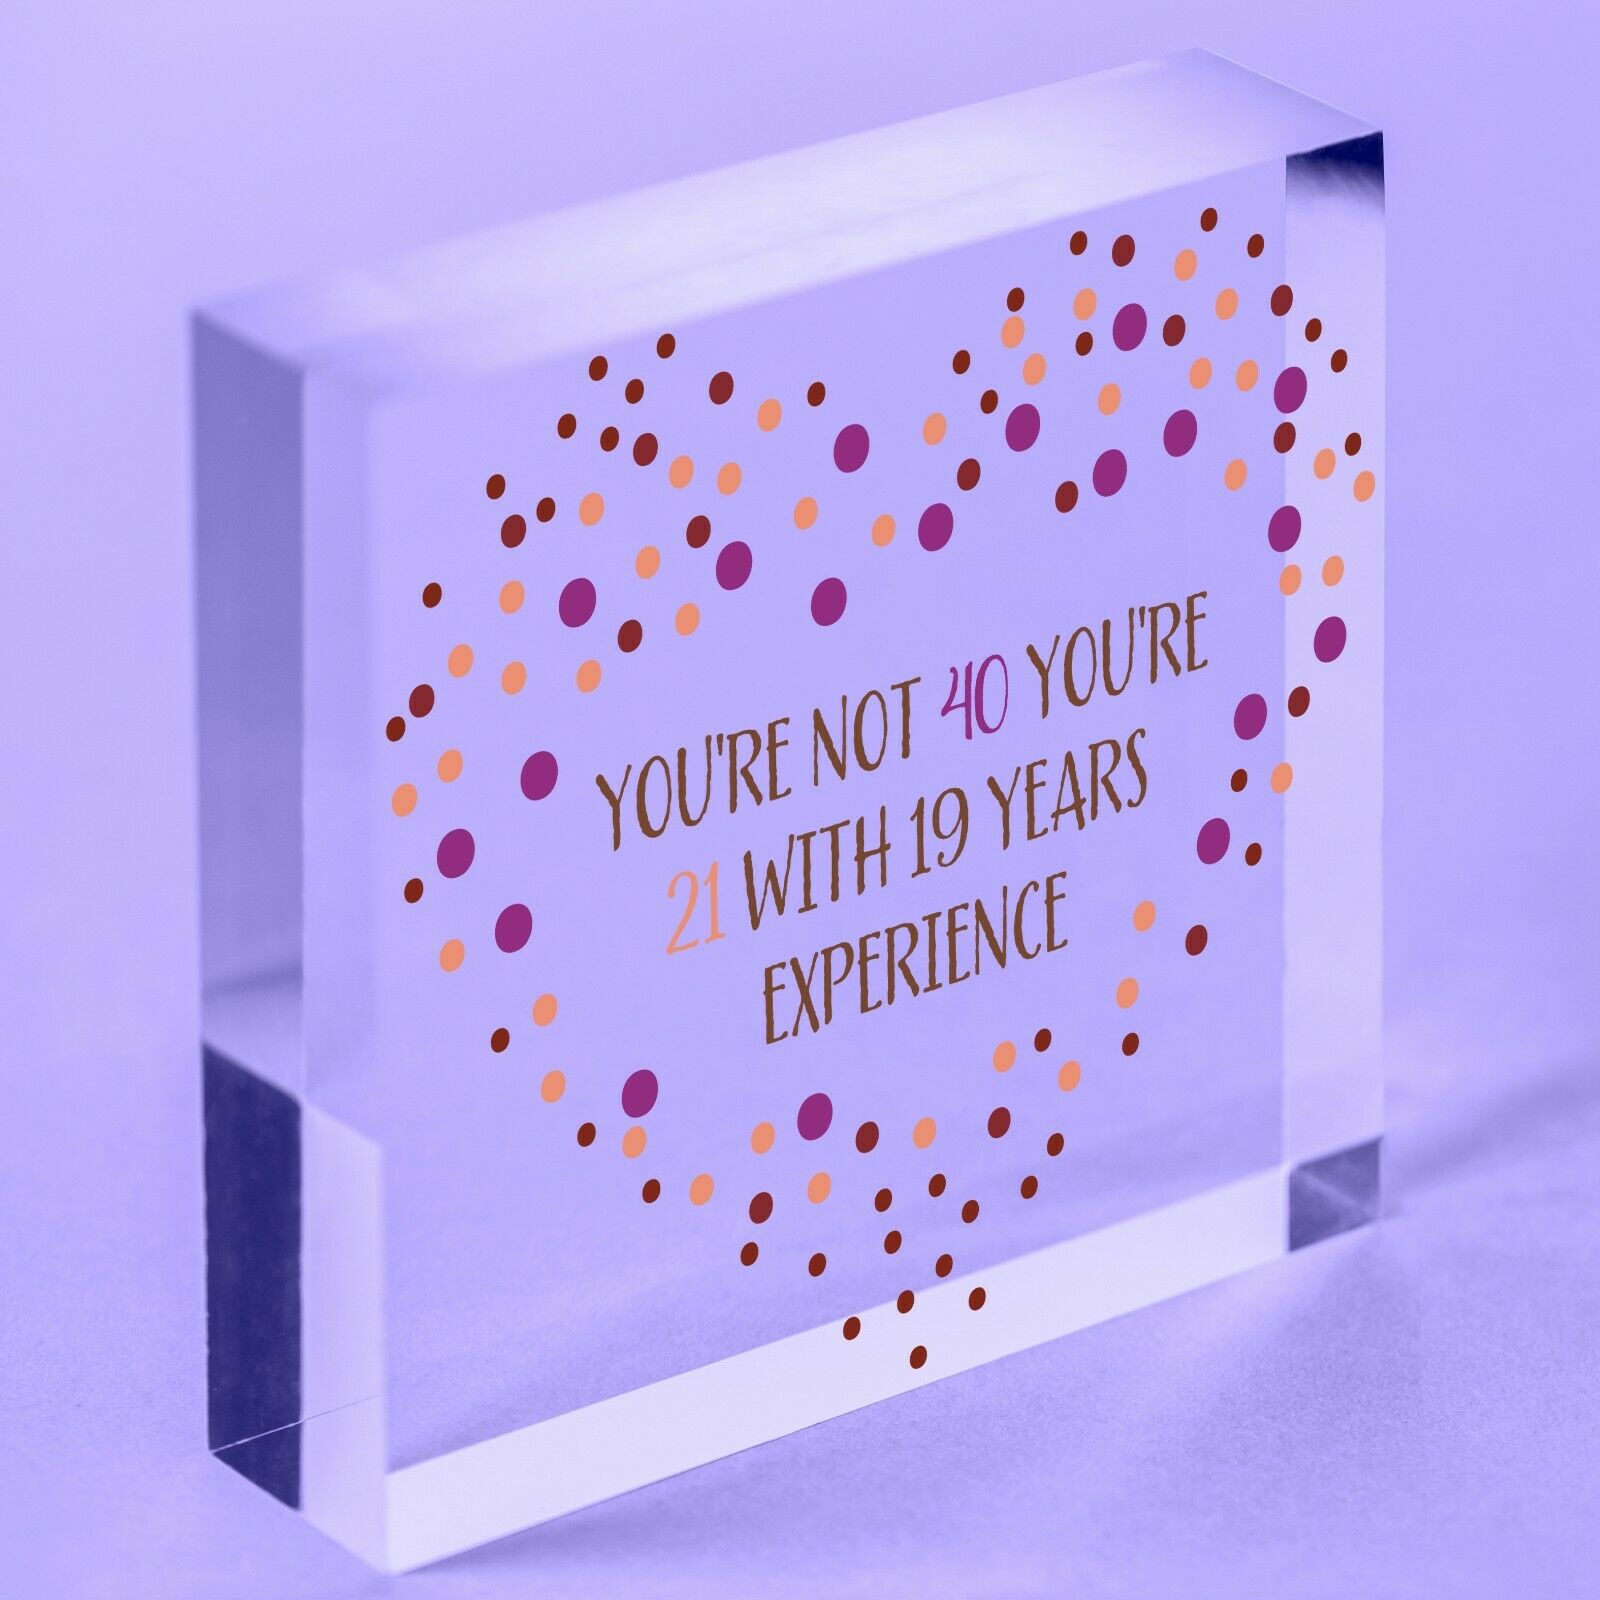 40th Birthday Gift Funny Acrylic Block Gift For Friend Brother Sister Dad Mum